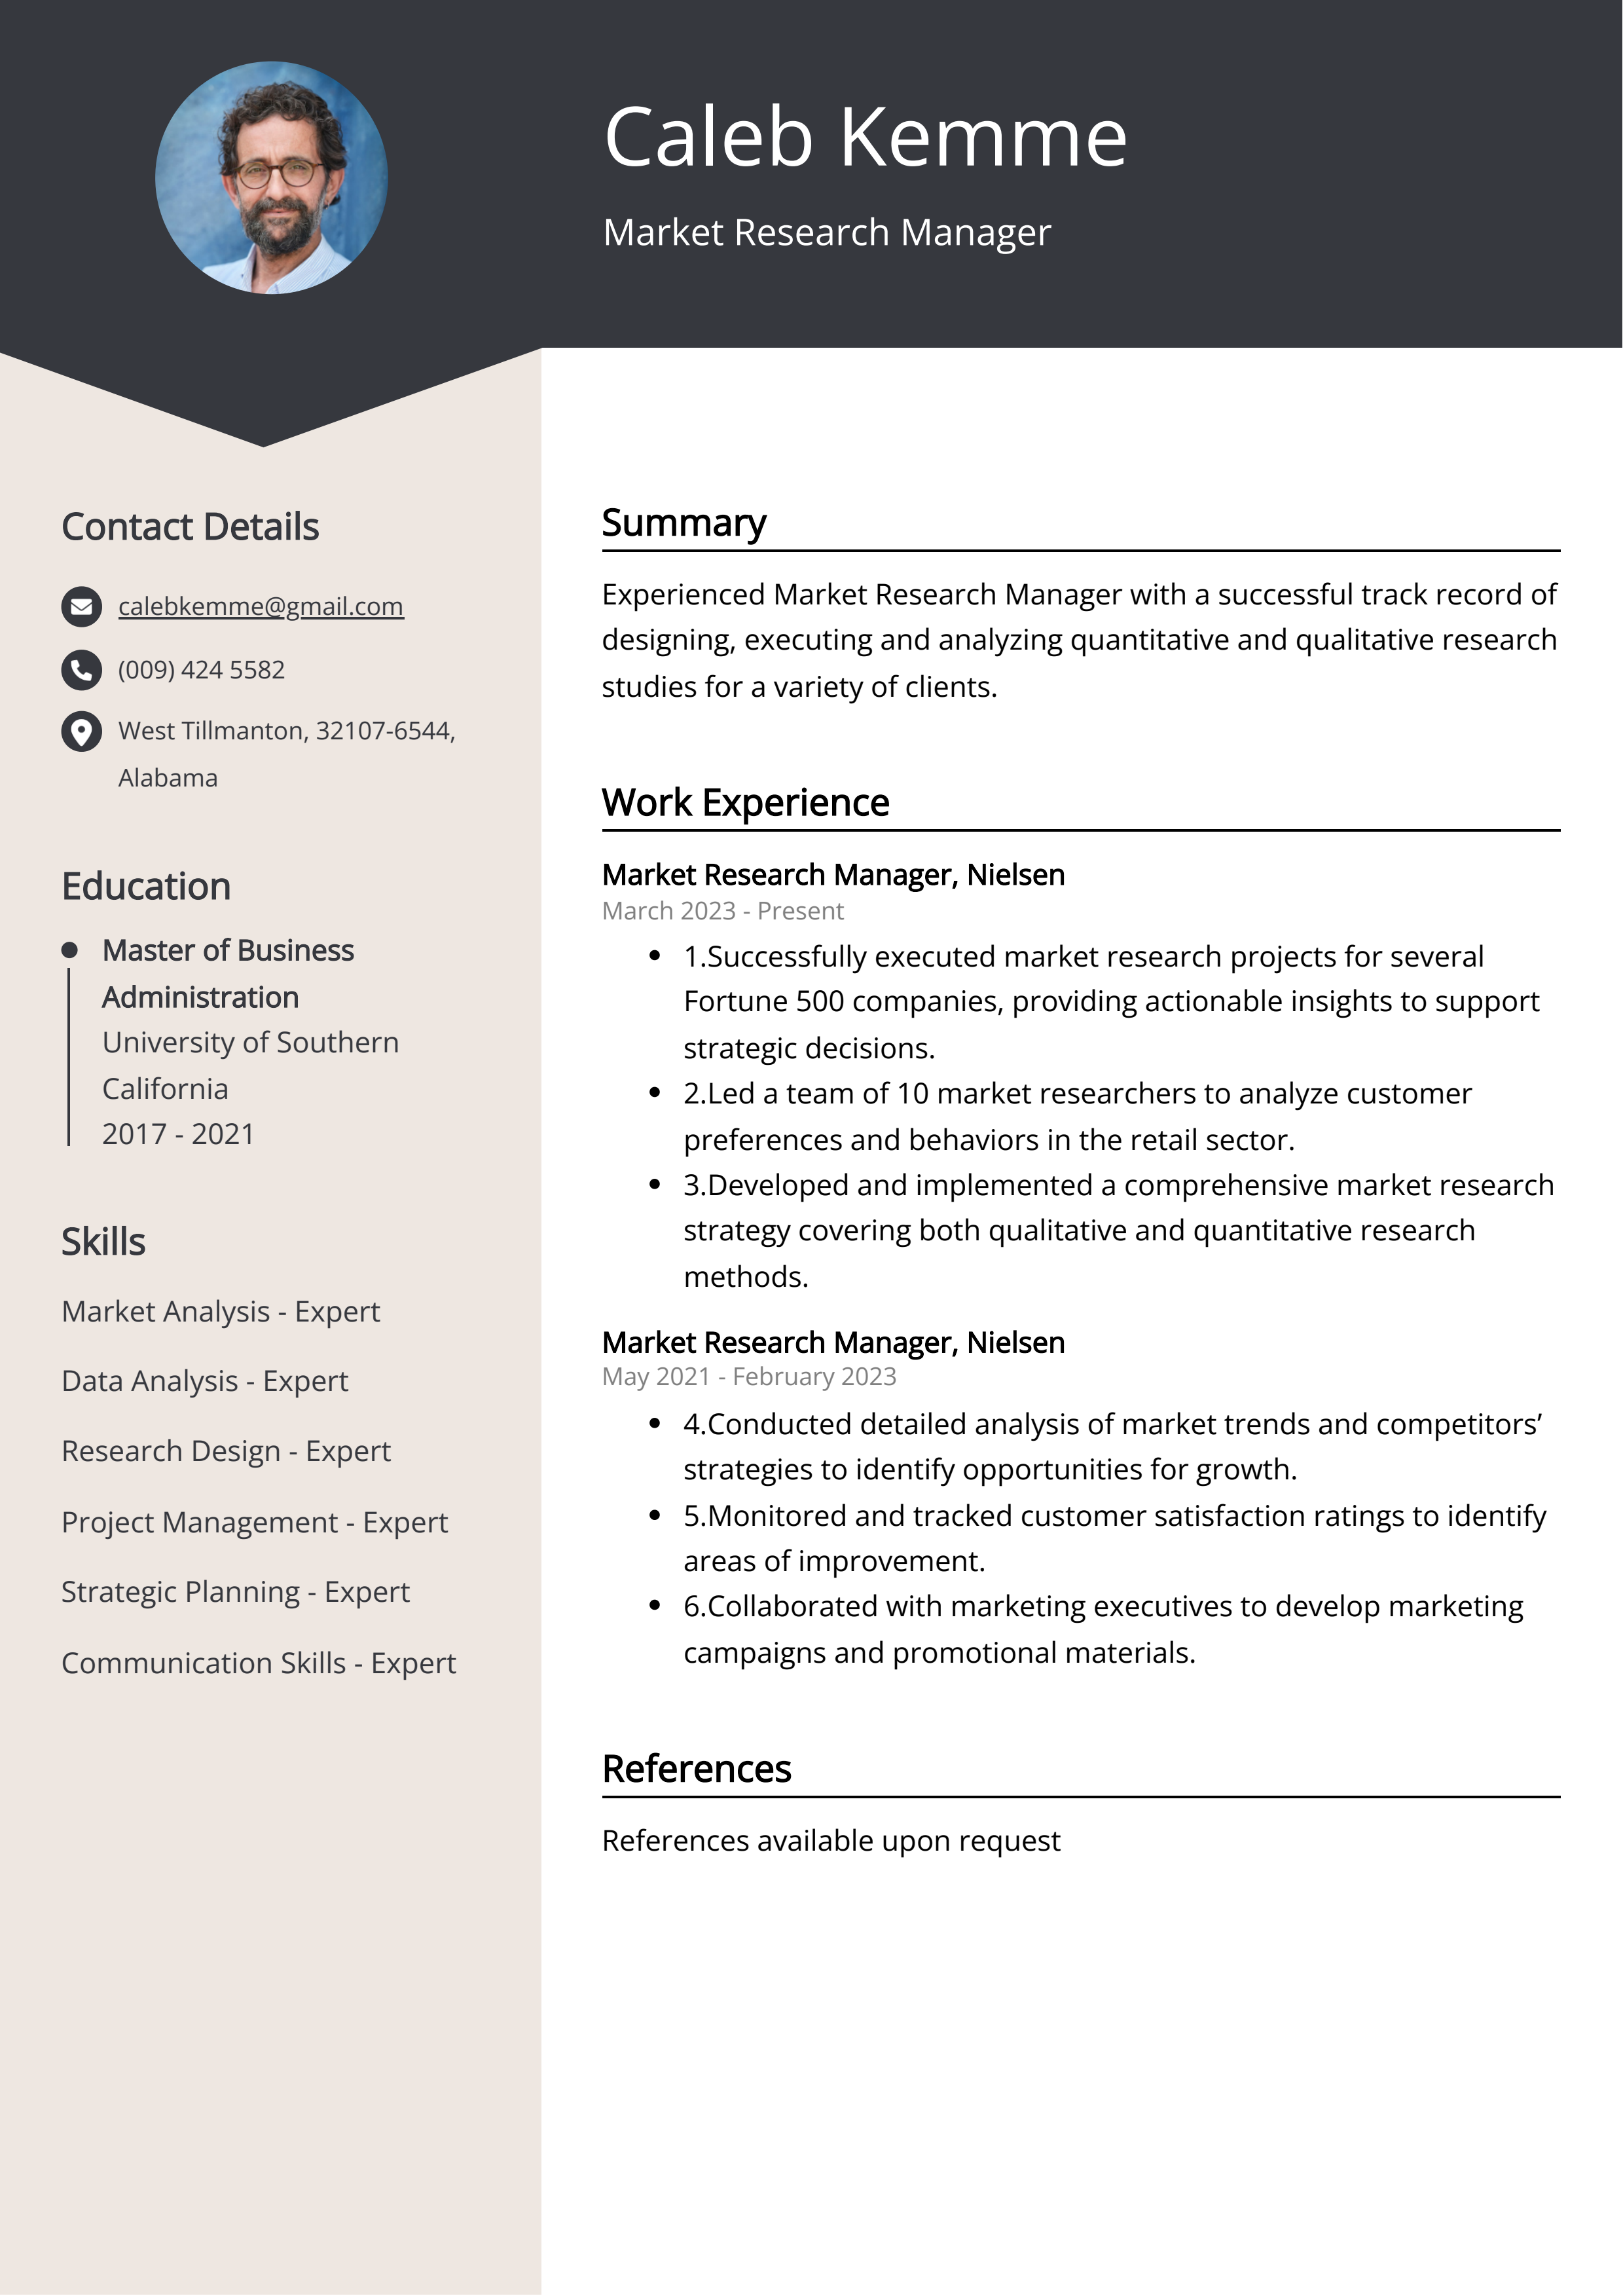 Market Research Manager CV Example